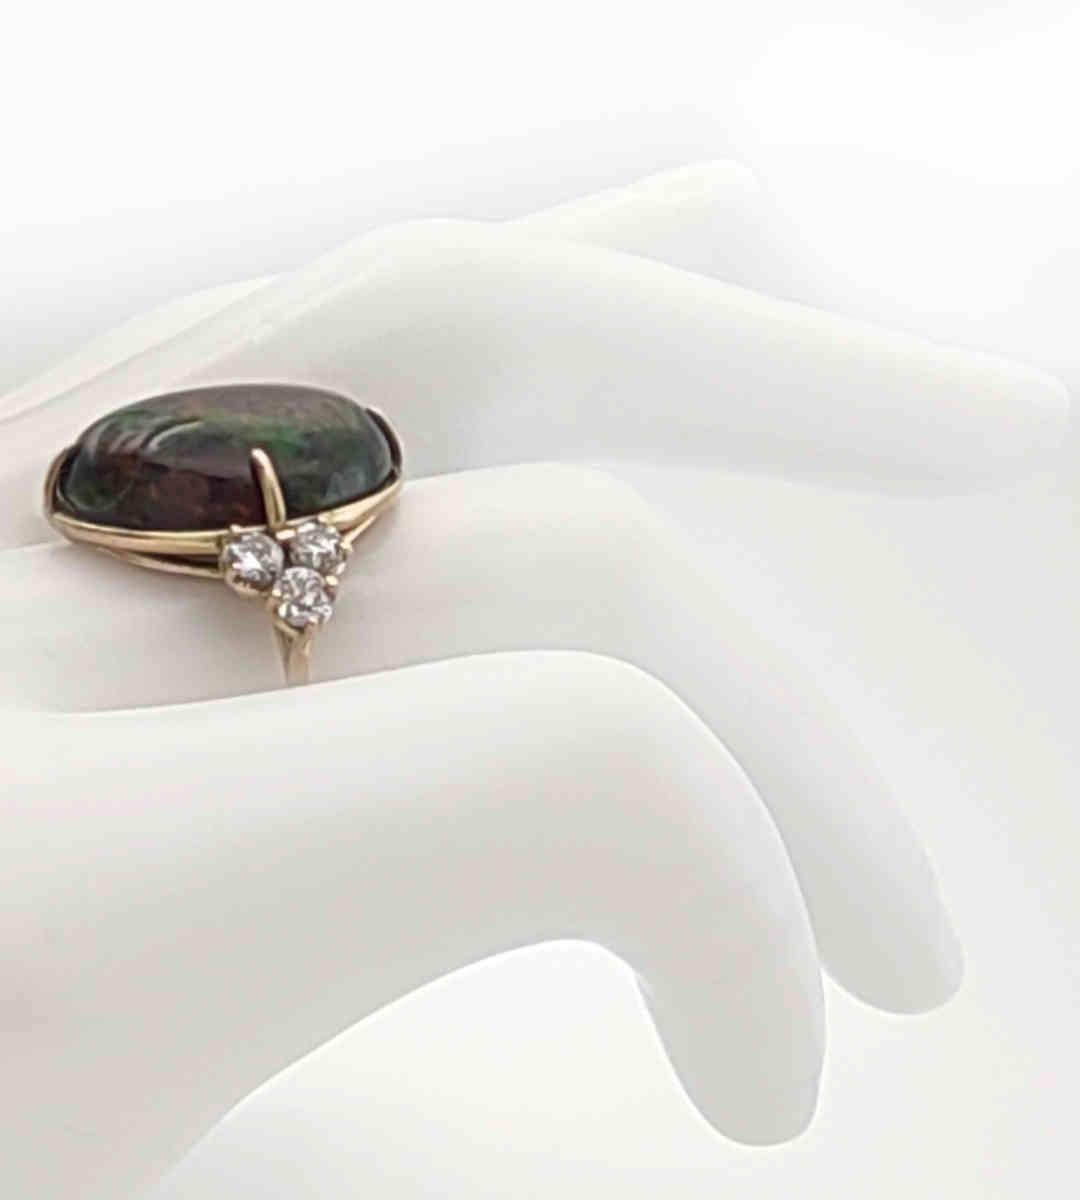 14k Gold Ring with Opal and Diamond - Special Gift for Her - Gemstone Jewelry 5